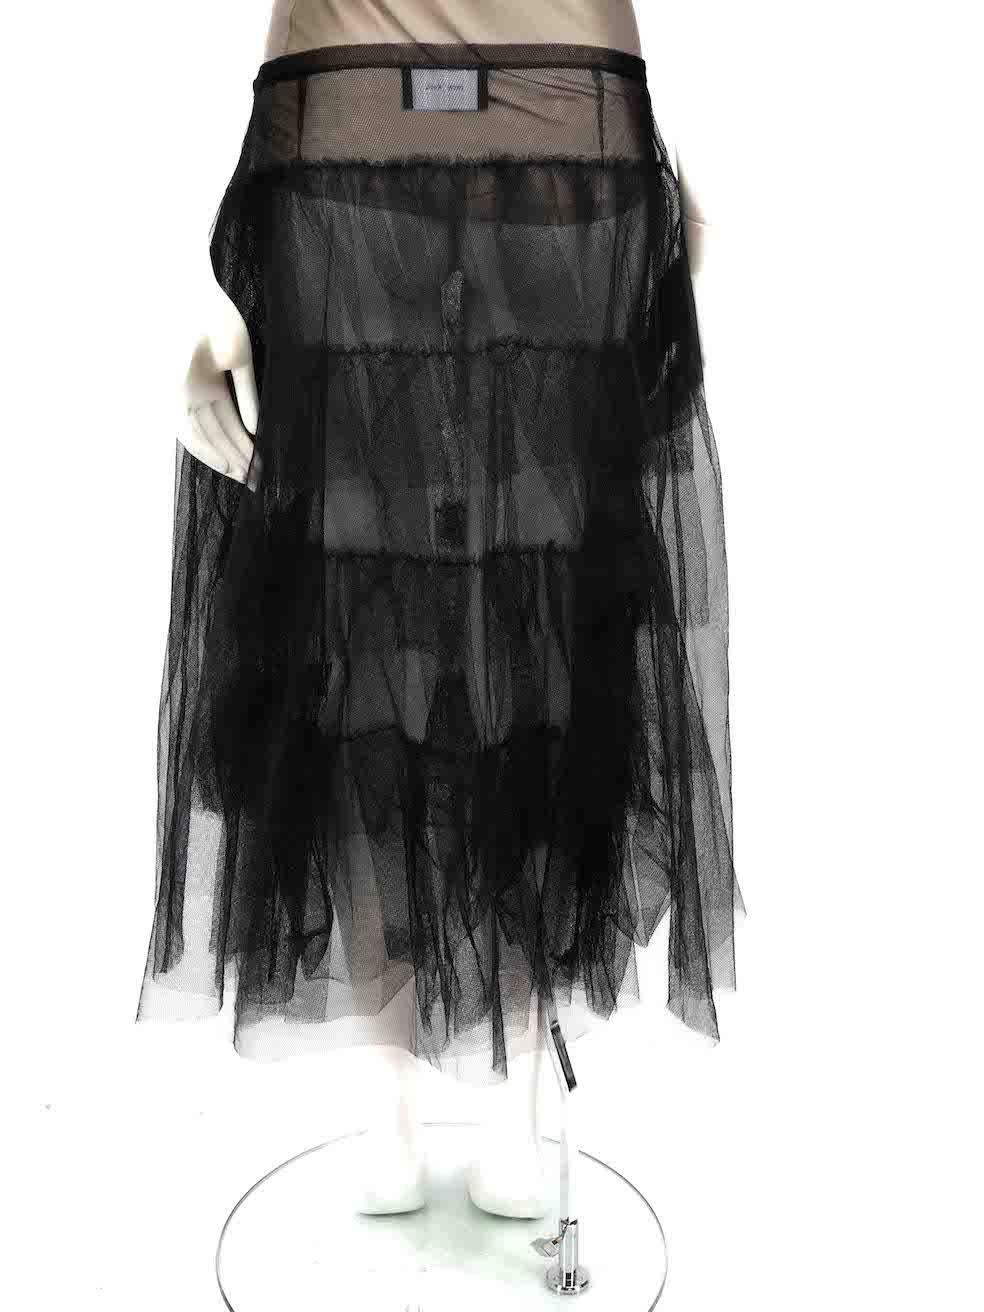 Simone Rocha Black Tiered Tulle Mesh Midi Skirt Size L In Good Condition For Sale In London, GB